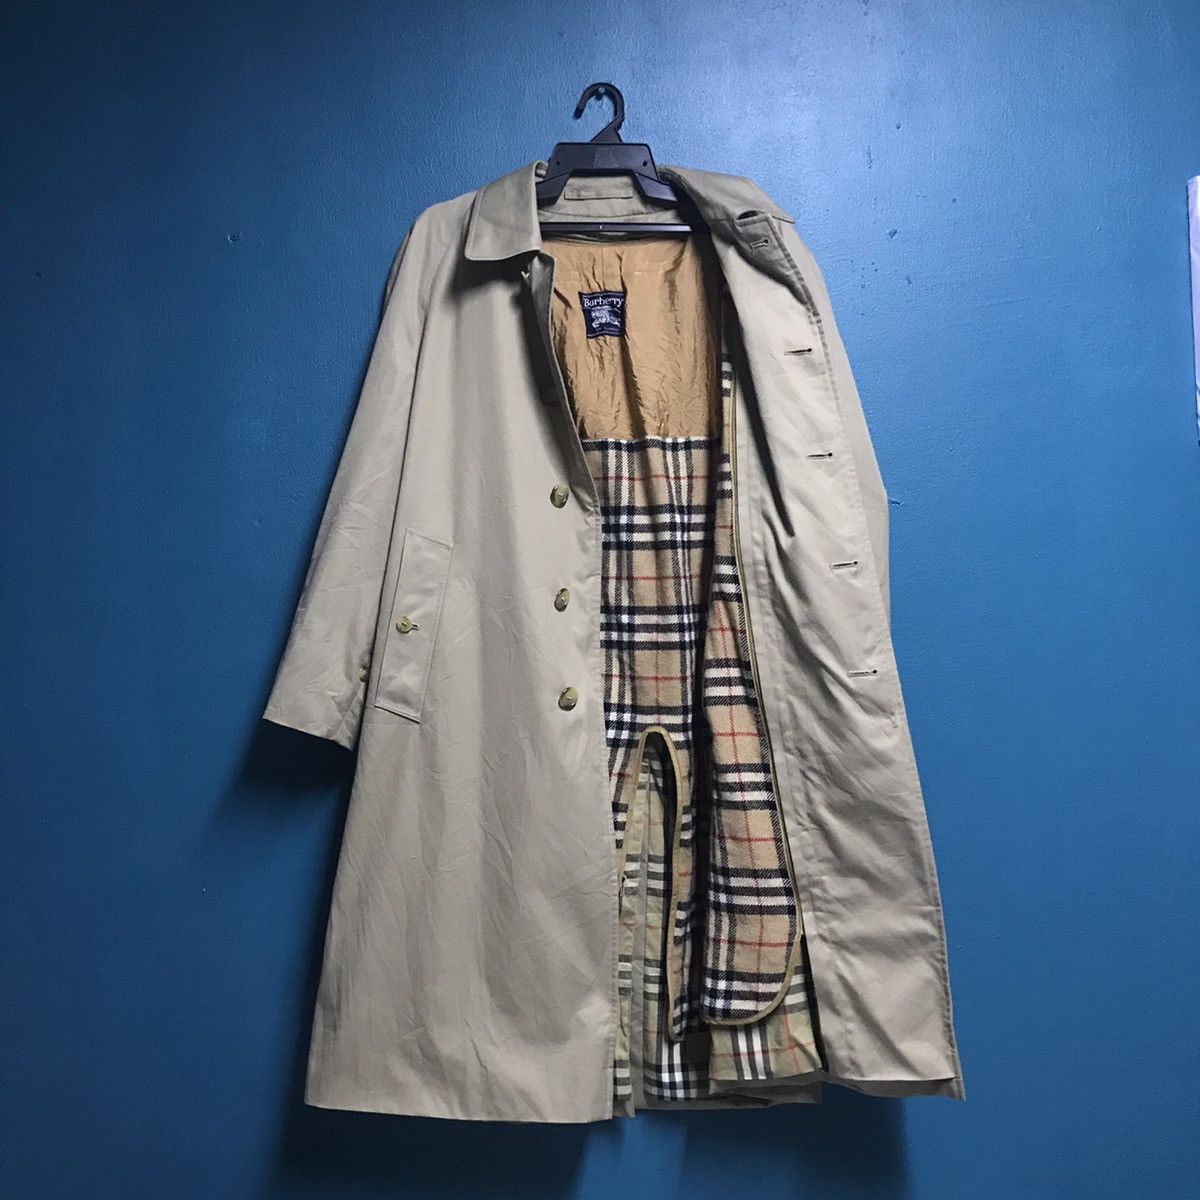 Burberry Prorsum Vintage burberry nova check trench coat with wool lining Size US L / EU 52-54 / 3 - 5 Thumbnail